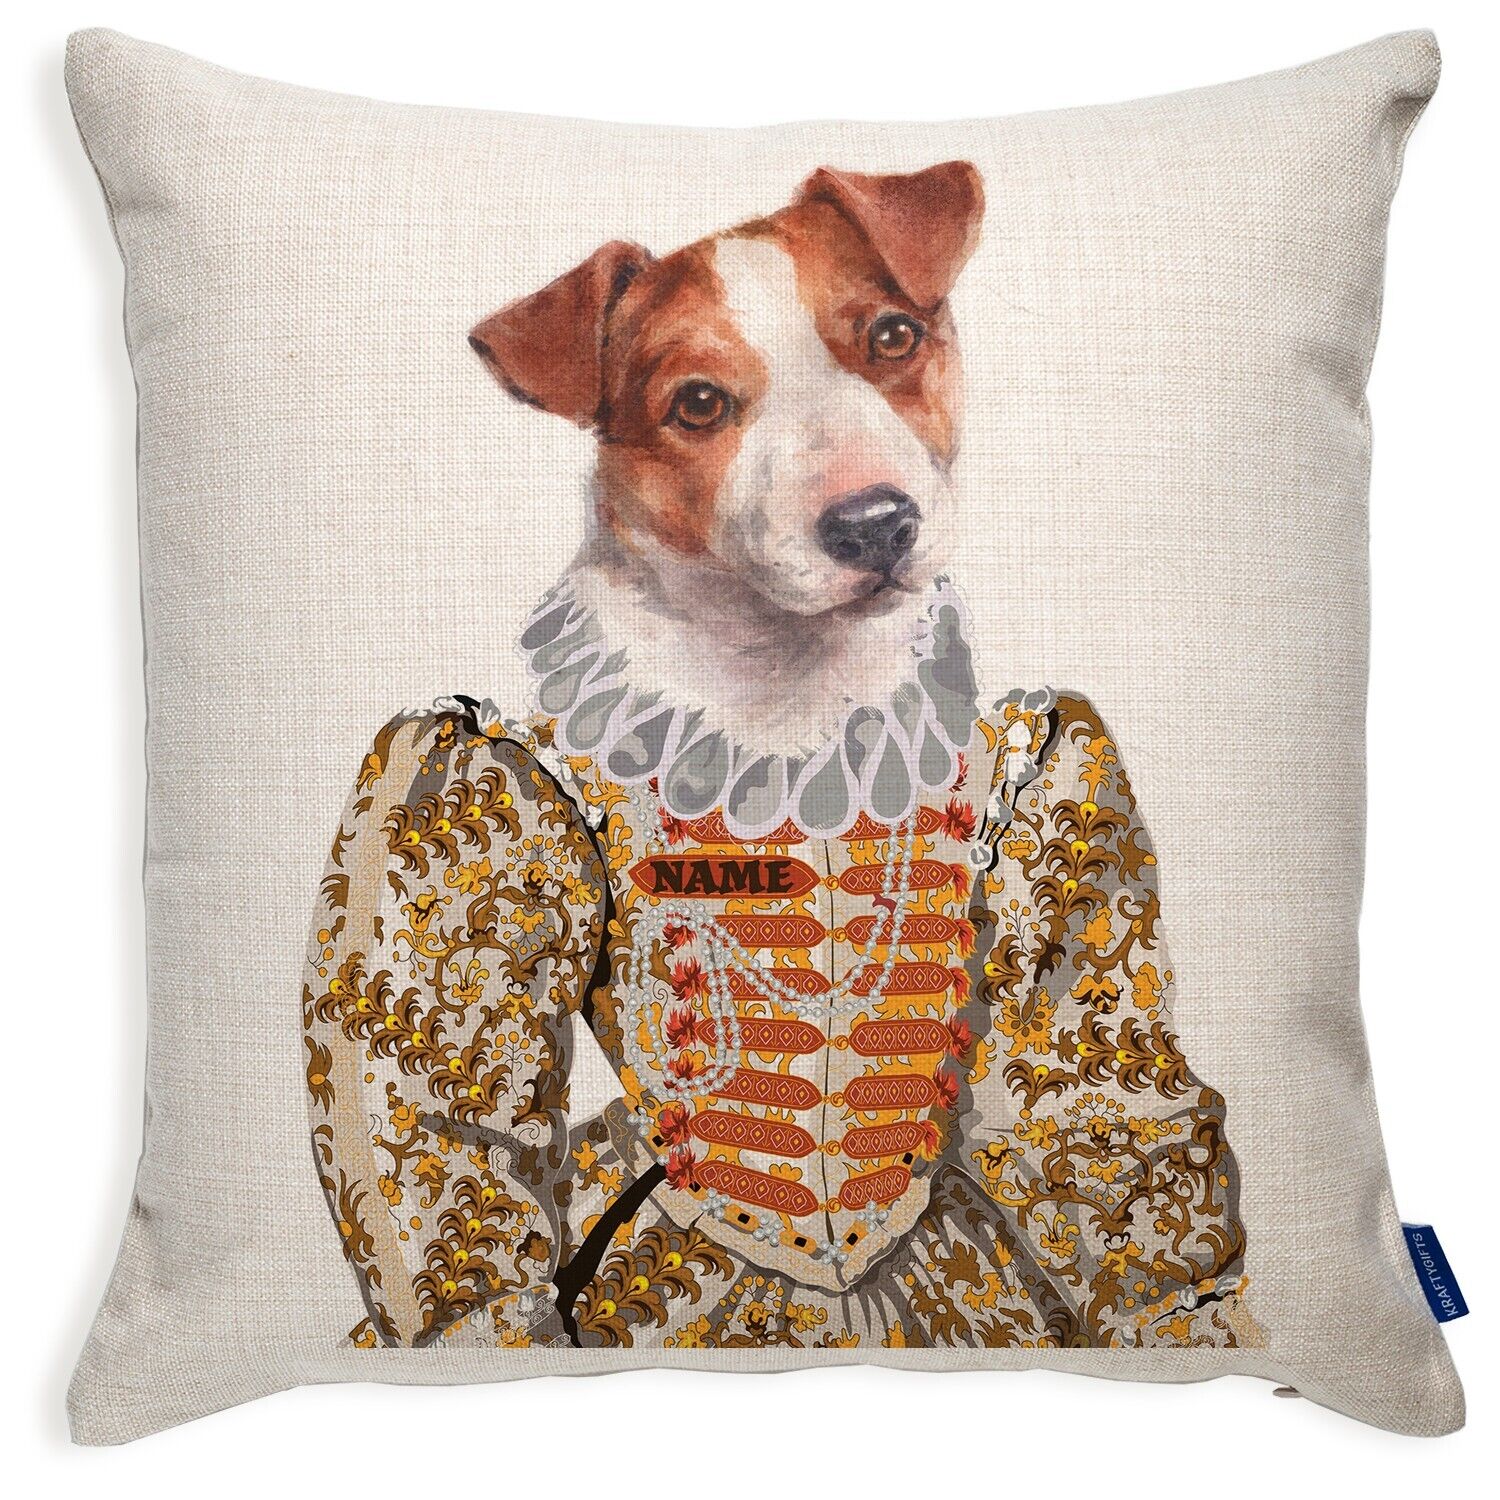 Personalised Jack Russell Cushion Cover Vintage Victorian Dog Decor Gift VDC57